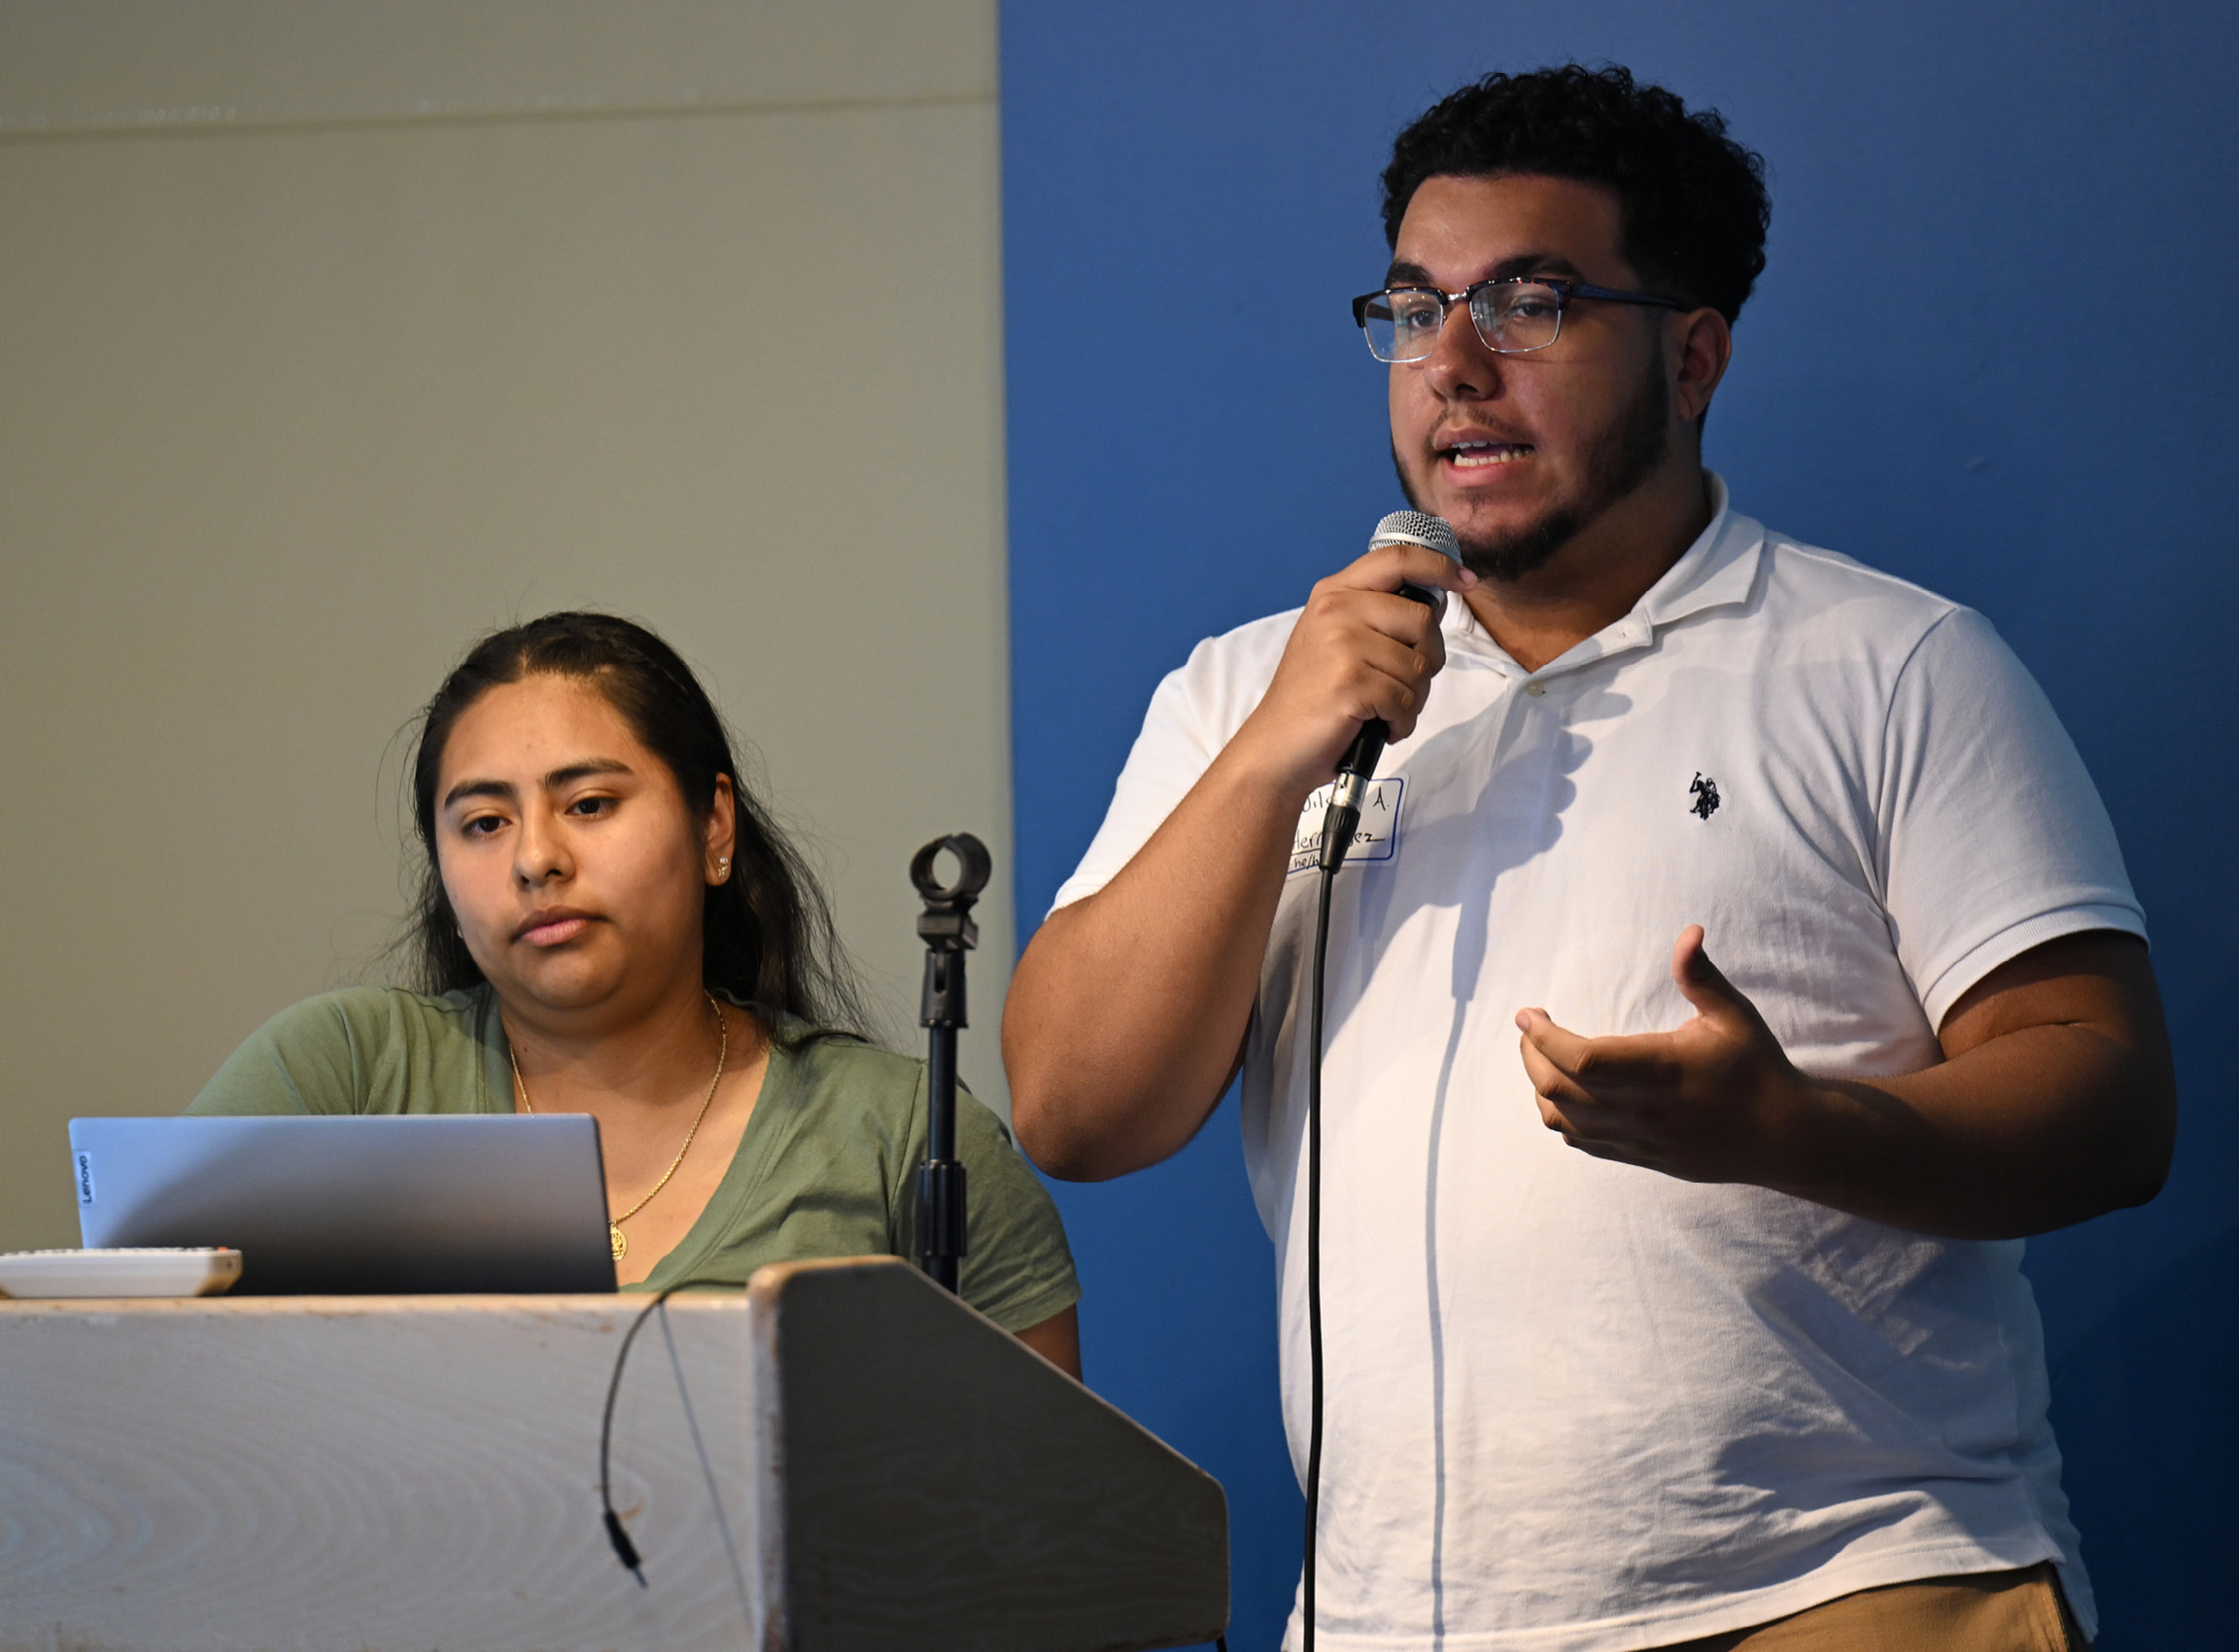 Summer Civic Leaders Wilson Hernandez ‘26 and Bella Castellano Palacios ‘25 offer the final presentation on their project Thursday, June 29, 2023 at Cro’s Nest. Pairs of students, generally rising second and third year, are matched with community organizations through the Holleran Center for Community Action and the Community Foundation of Eastern Connecticut.